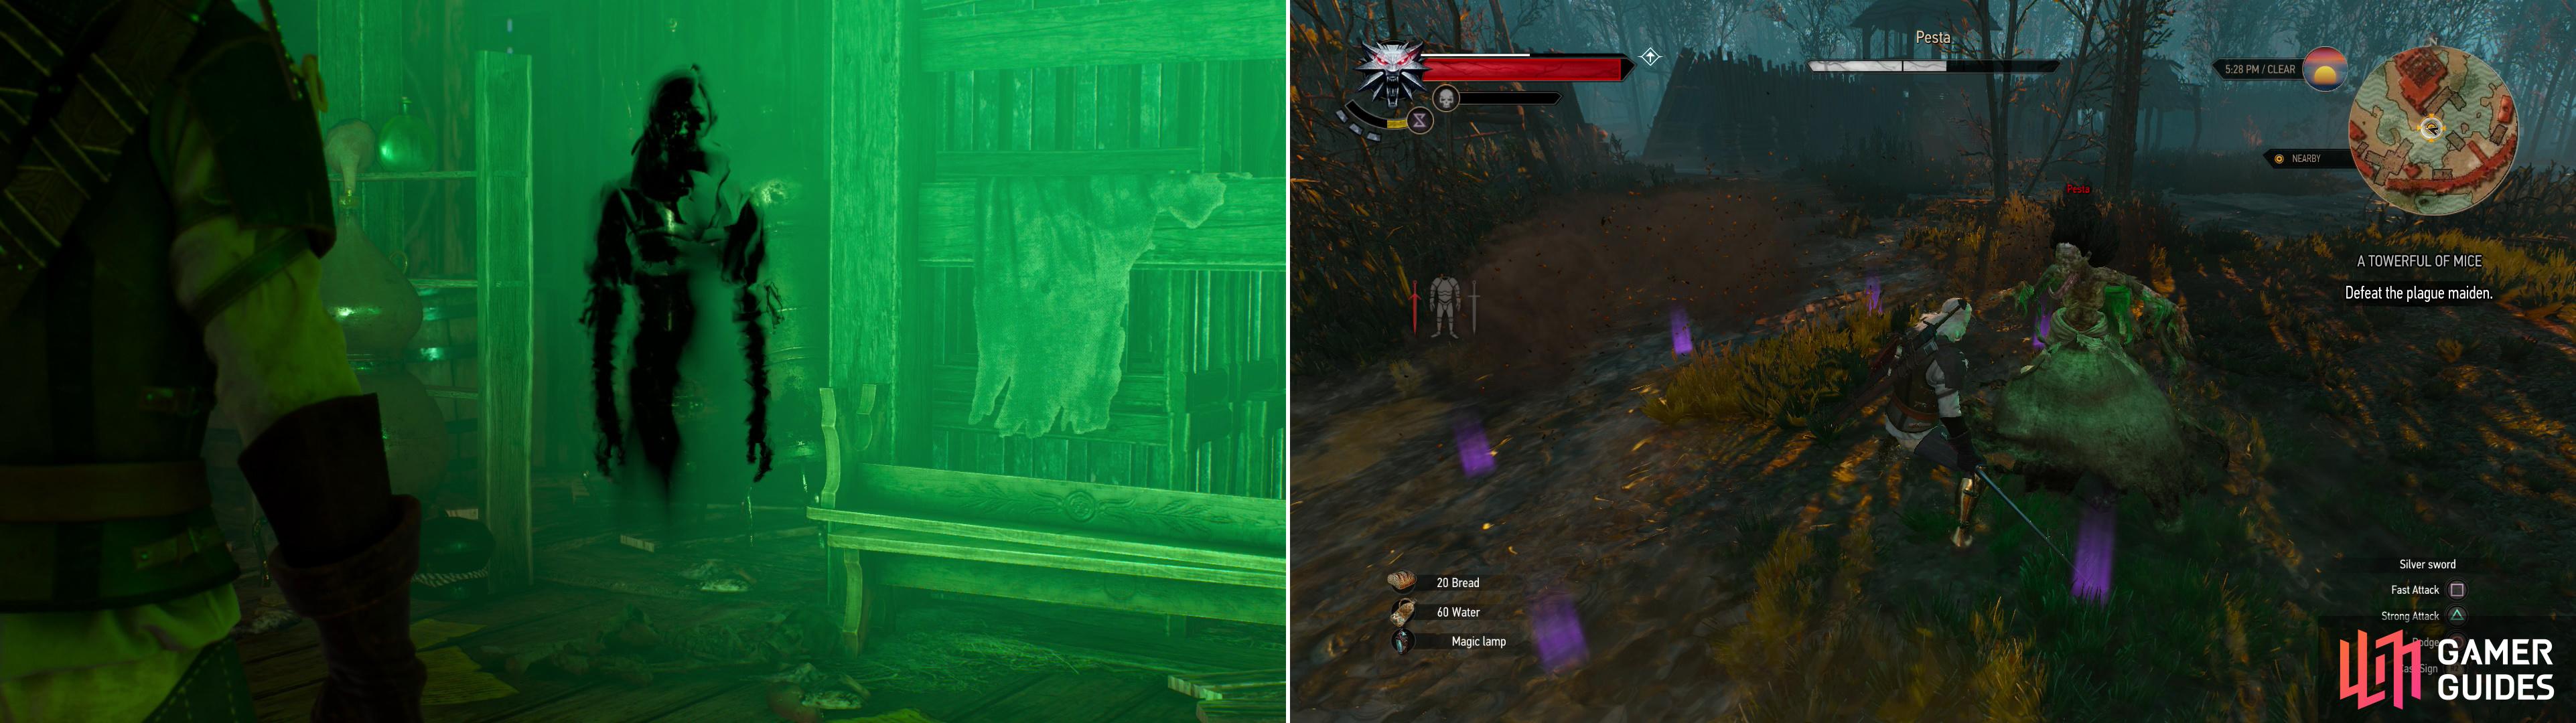 Use the Magic Lamp to talk to Annabelle at the top of the tower (left). If you refuse to help her, she'll reveal her true form and turn violent (right).